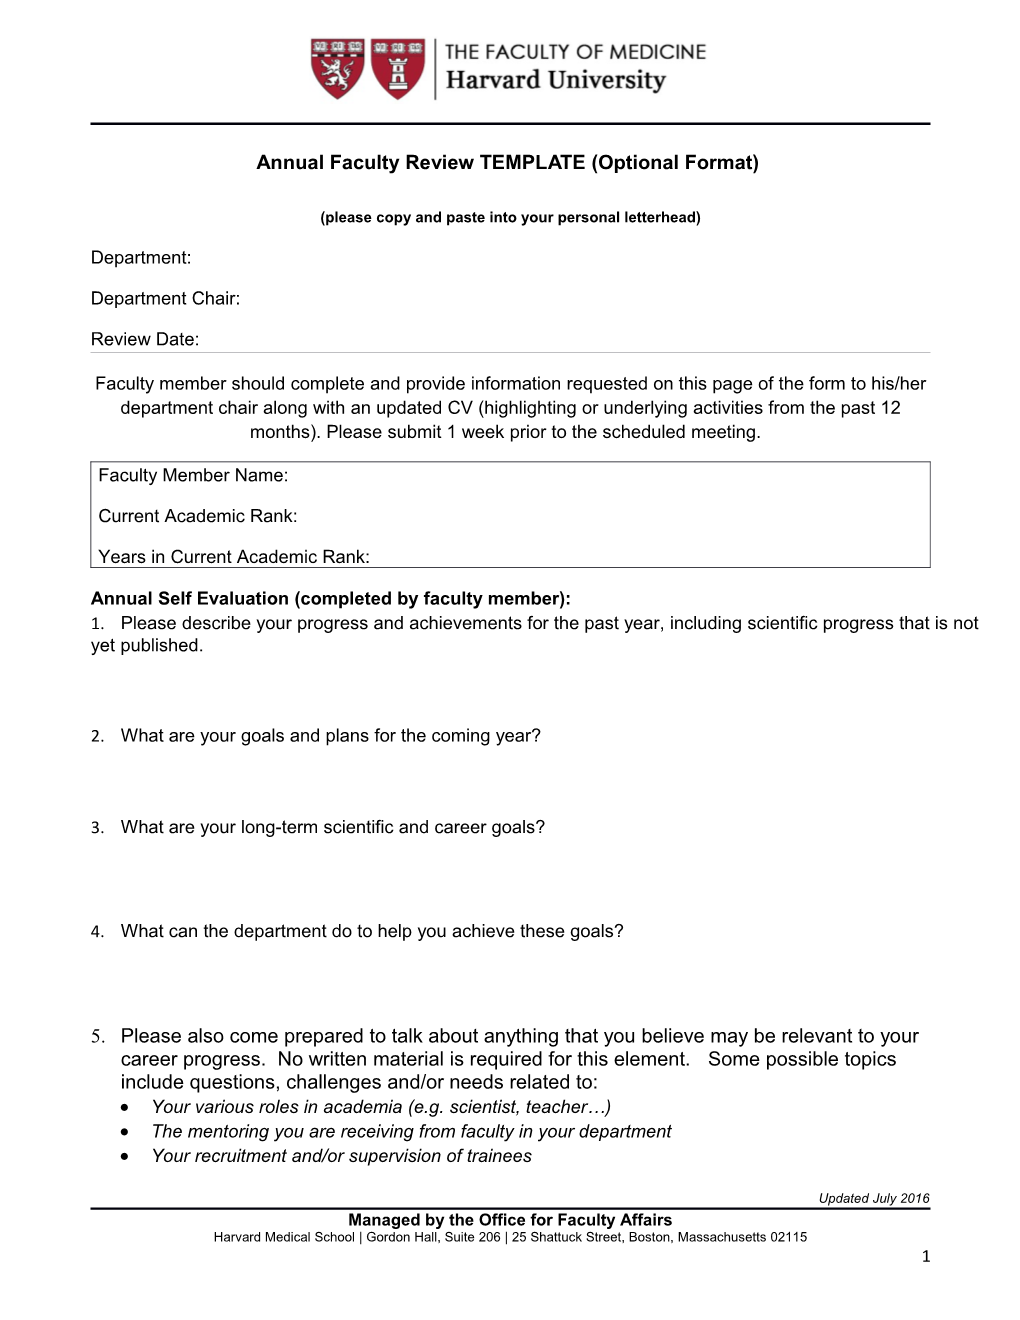 Annual Faculty Review TEMPLATE (Optional Format)